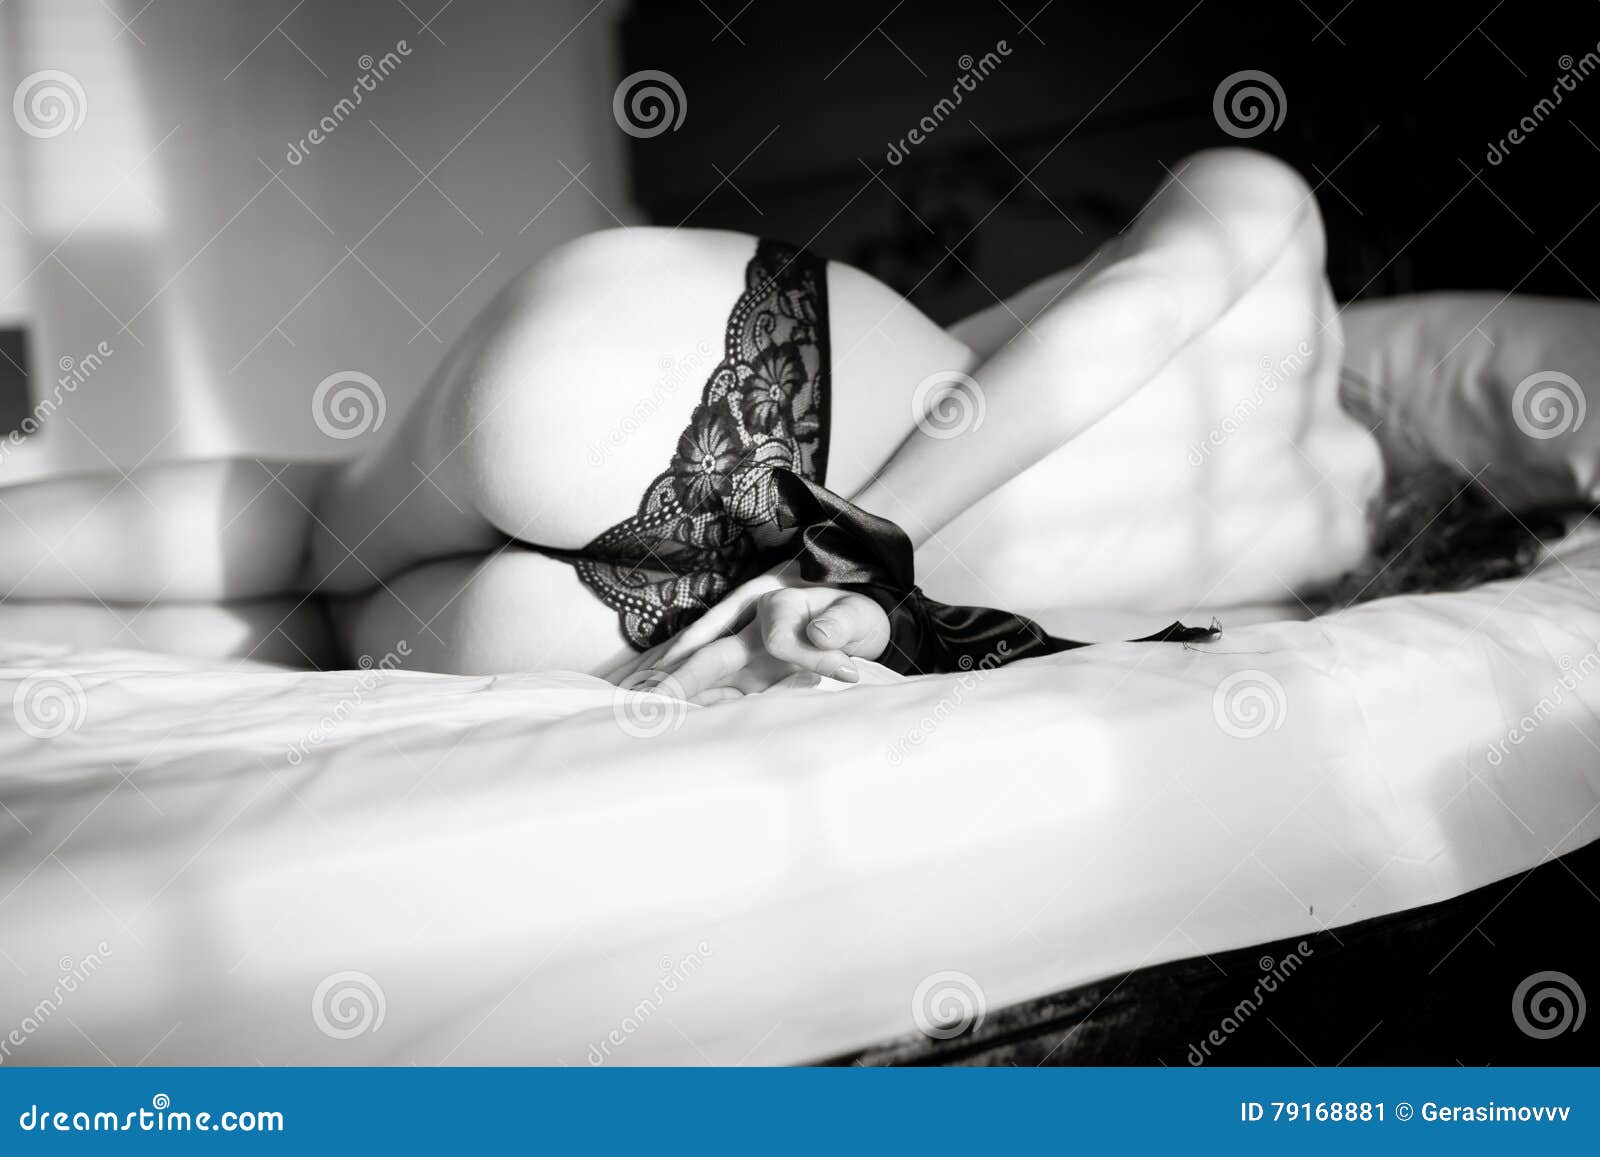 4153 Man Tied Bed Images, Stock Photos & Vectors